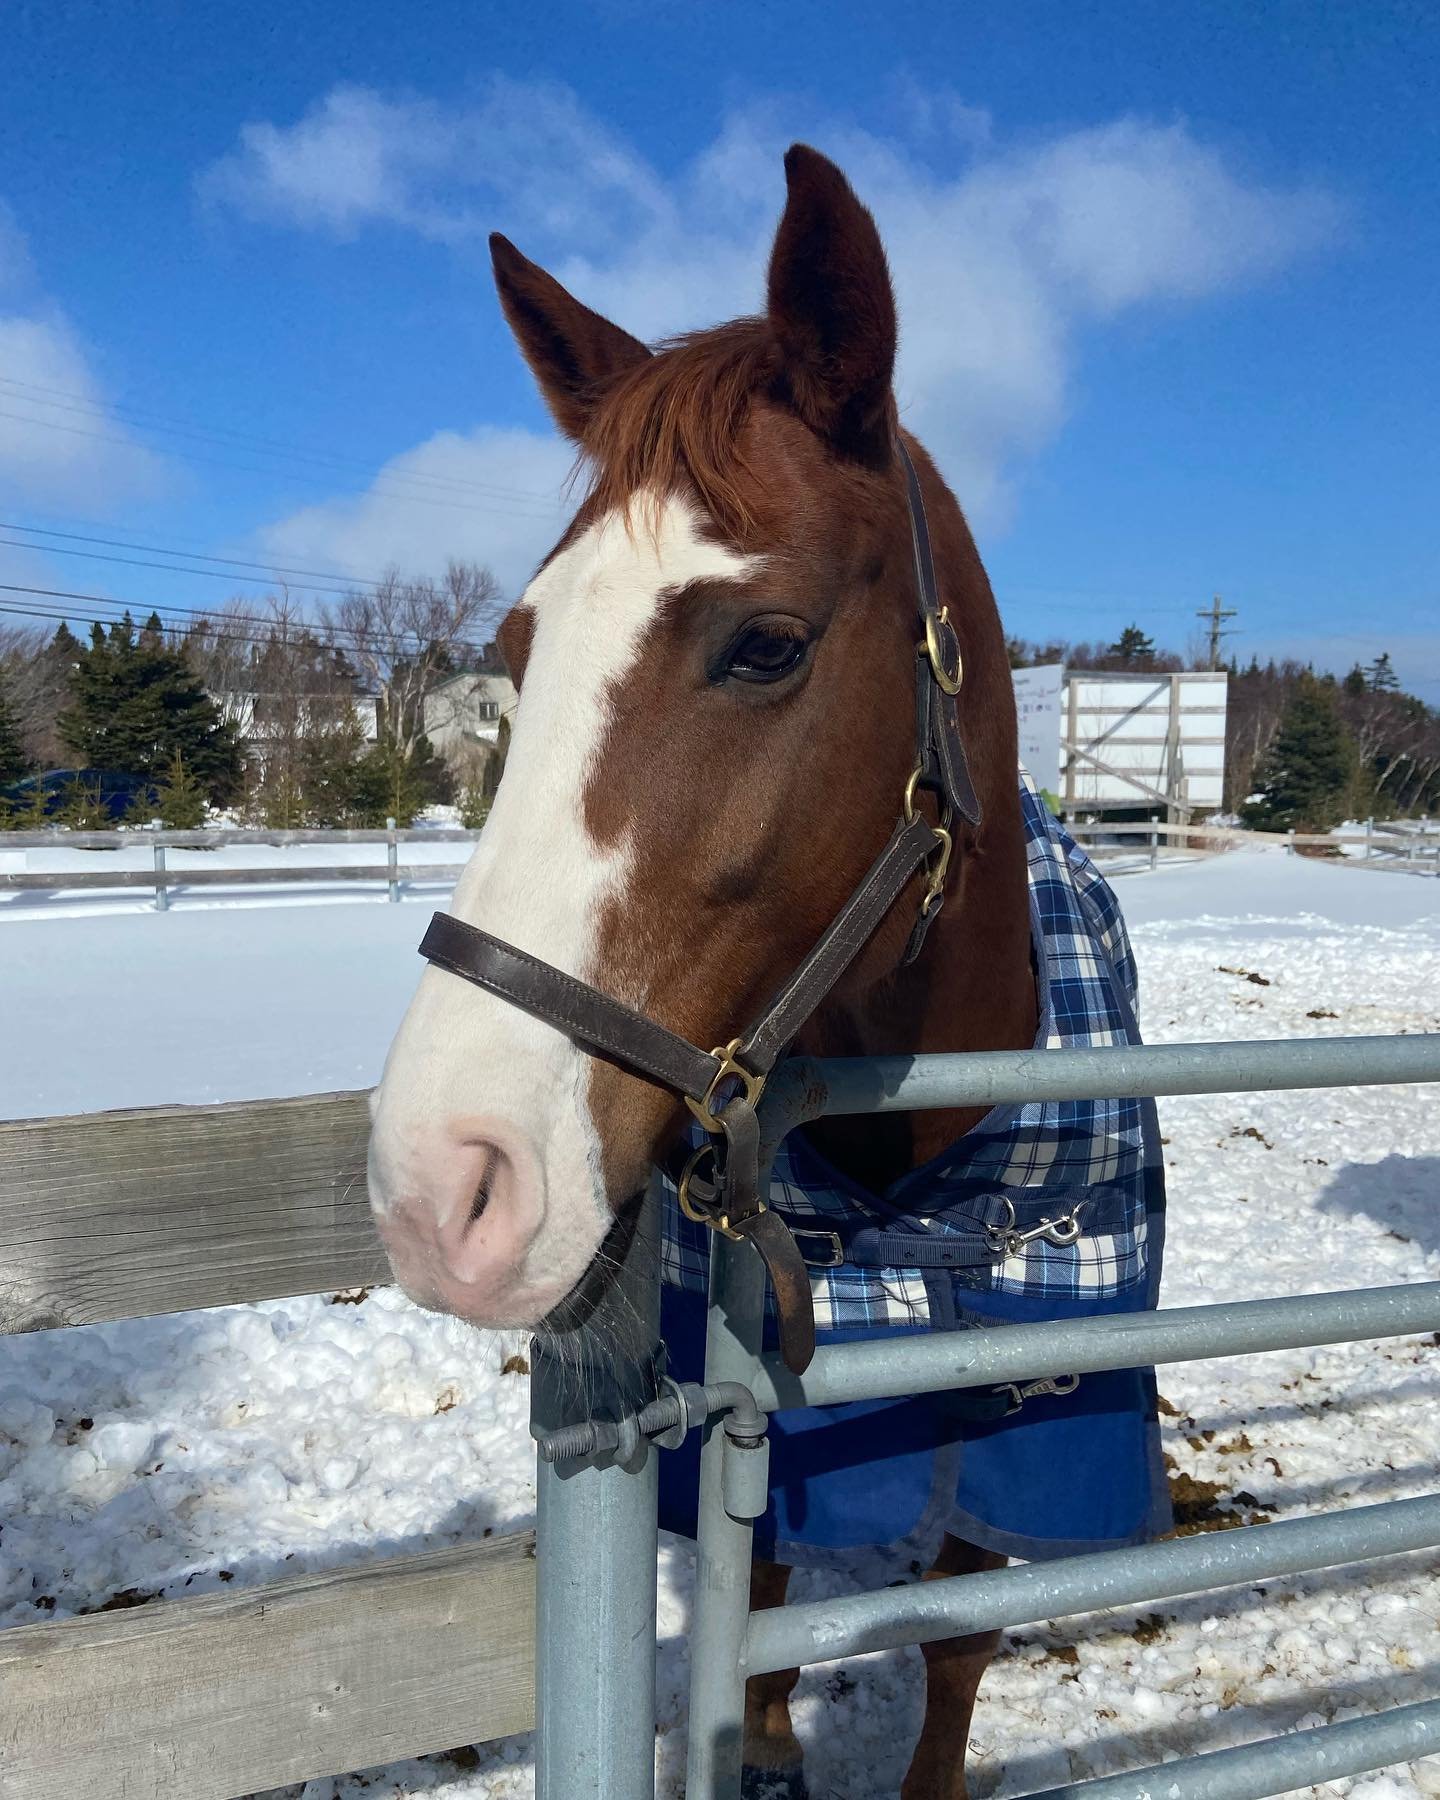 Welcome back to &ldquo;Meet the Horses Monday&rdquo; where we will be doing a weekly feature on the herd of horses that live at Rainbow Riders 🌈🐴 

Today&rsquo;s feature is on the amazing Annie! Annie is a 9 year old mare who has been at Rainbow Ri